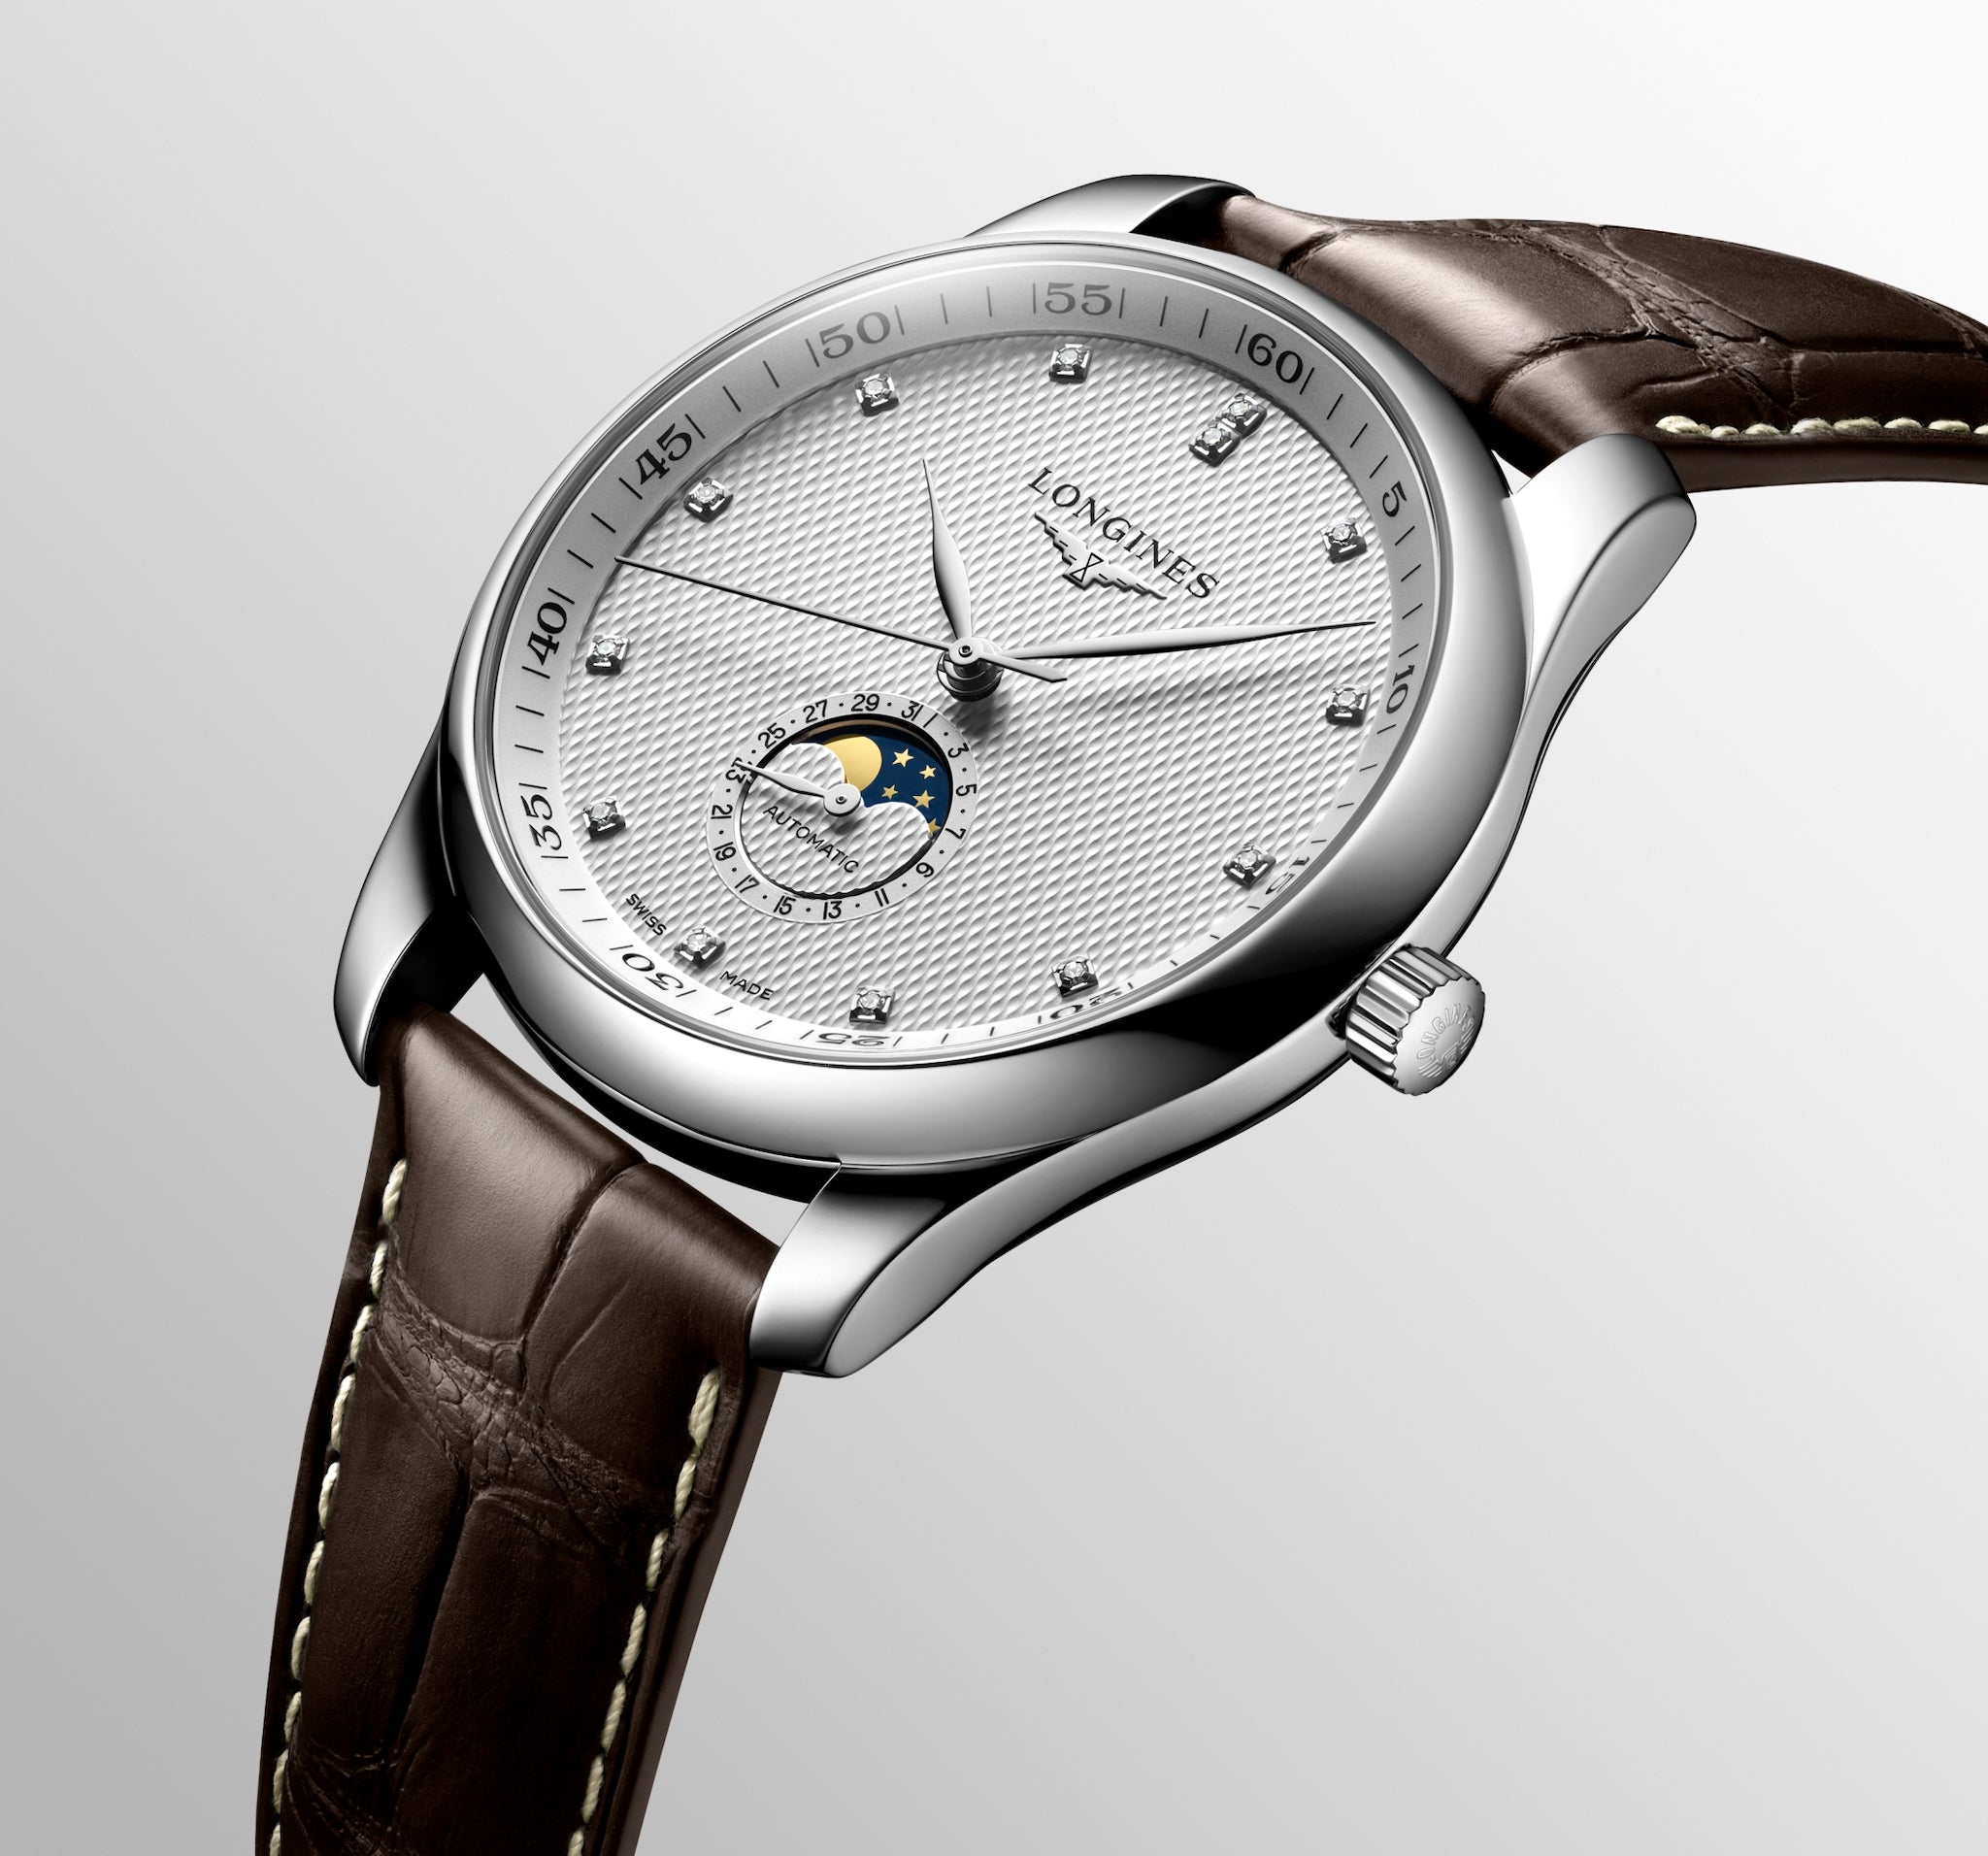 THE LONGINES MASTER COLLECTION L2.919.4.77.3